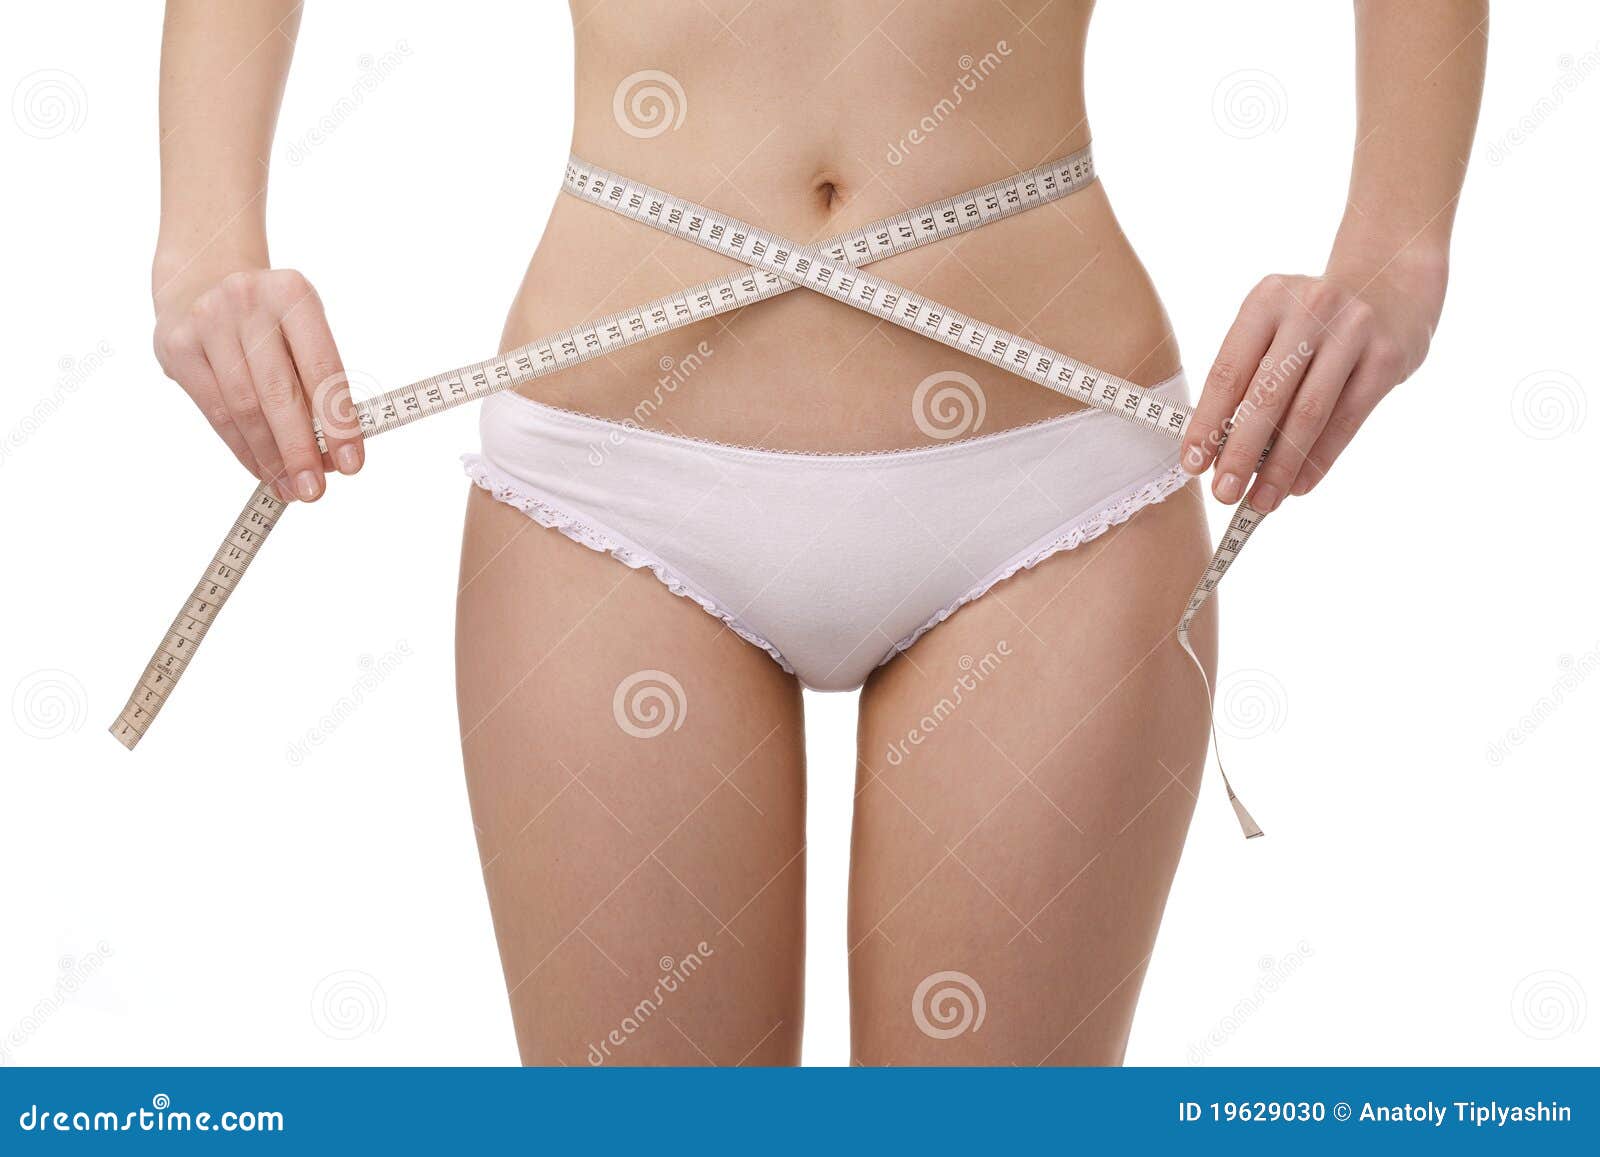 Slim Girl With Perfect Body Measuring Hips Stock Photo, Picture and Royalty  Free Image. Image 14754738.